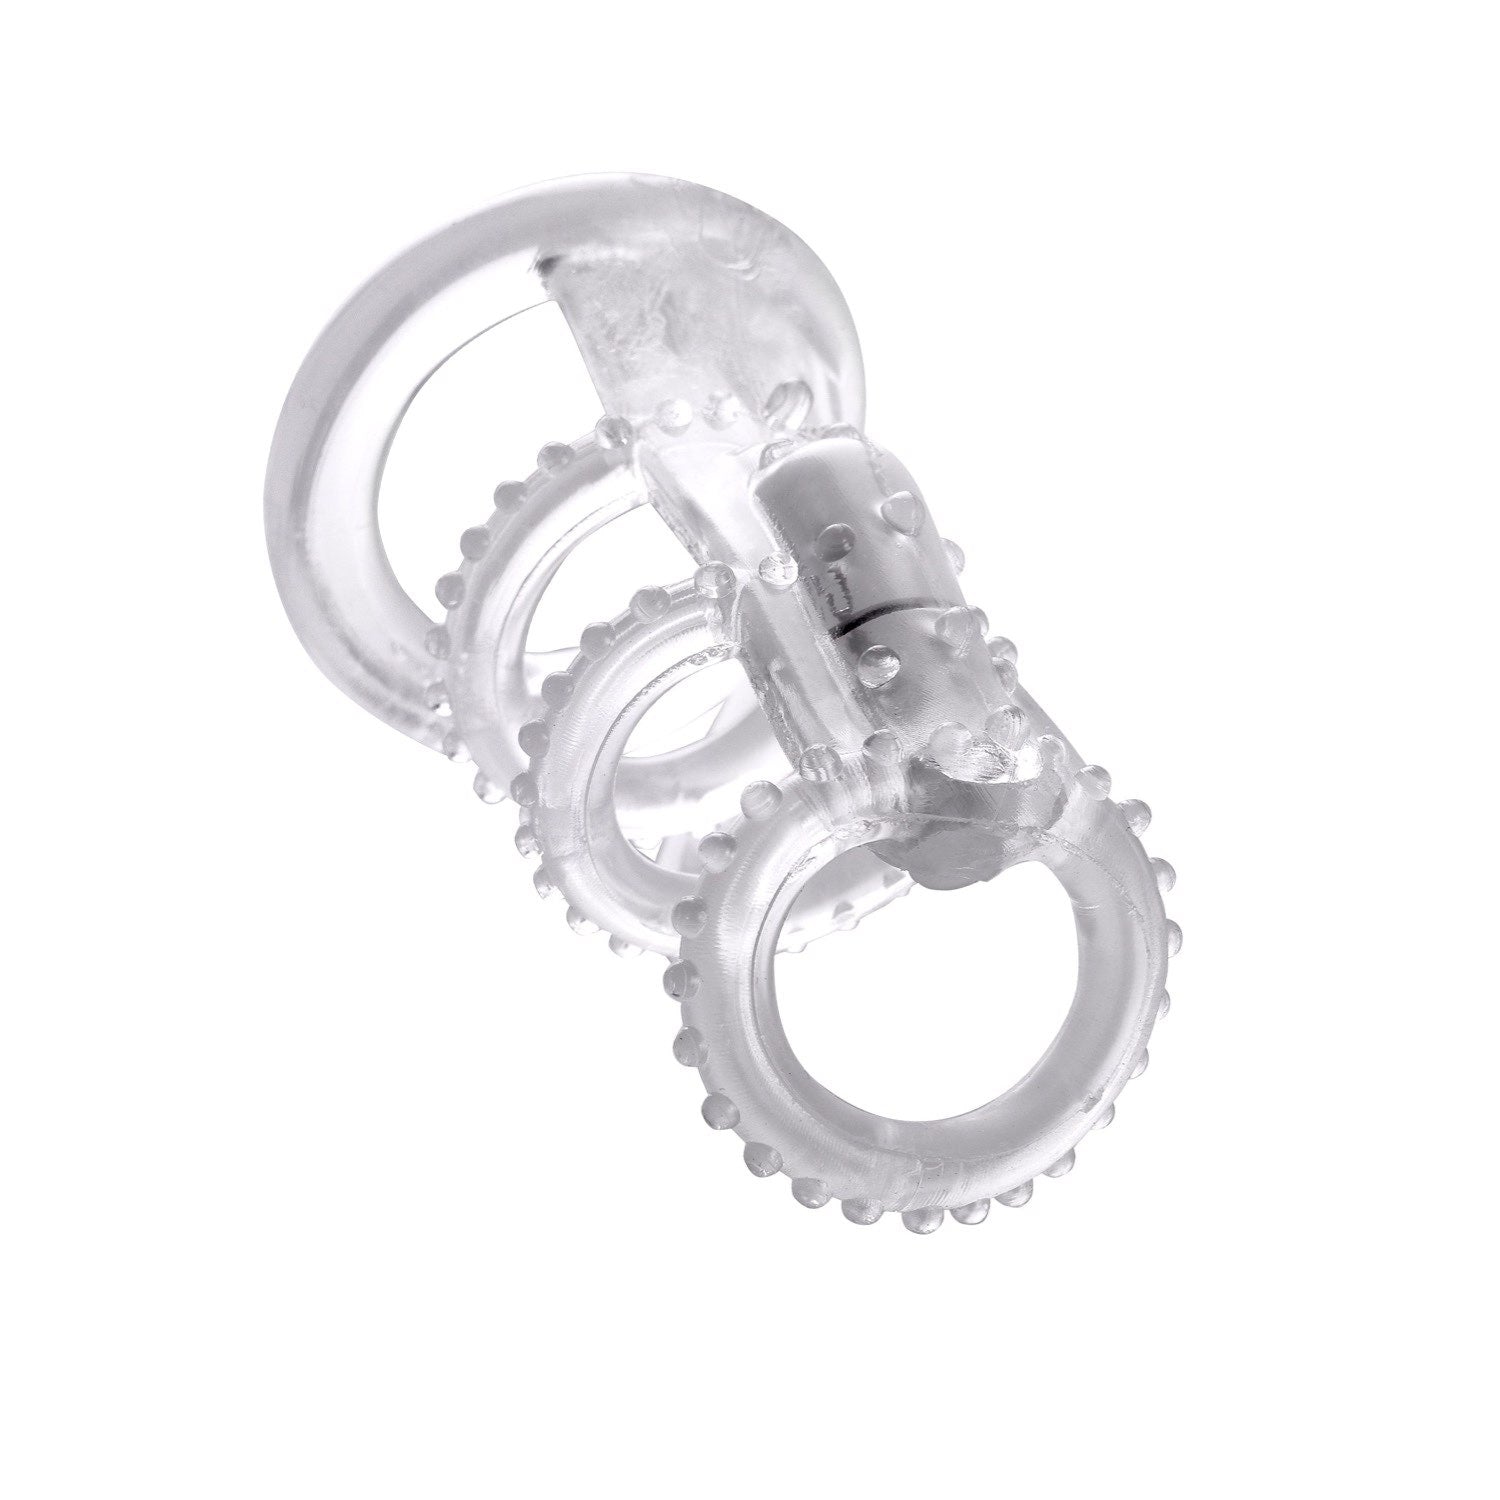 Fantasy X-Tensions Vibrating Cock Cage - Clear Vibrating Penis Sleeve by Pipedream